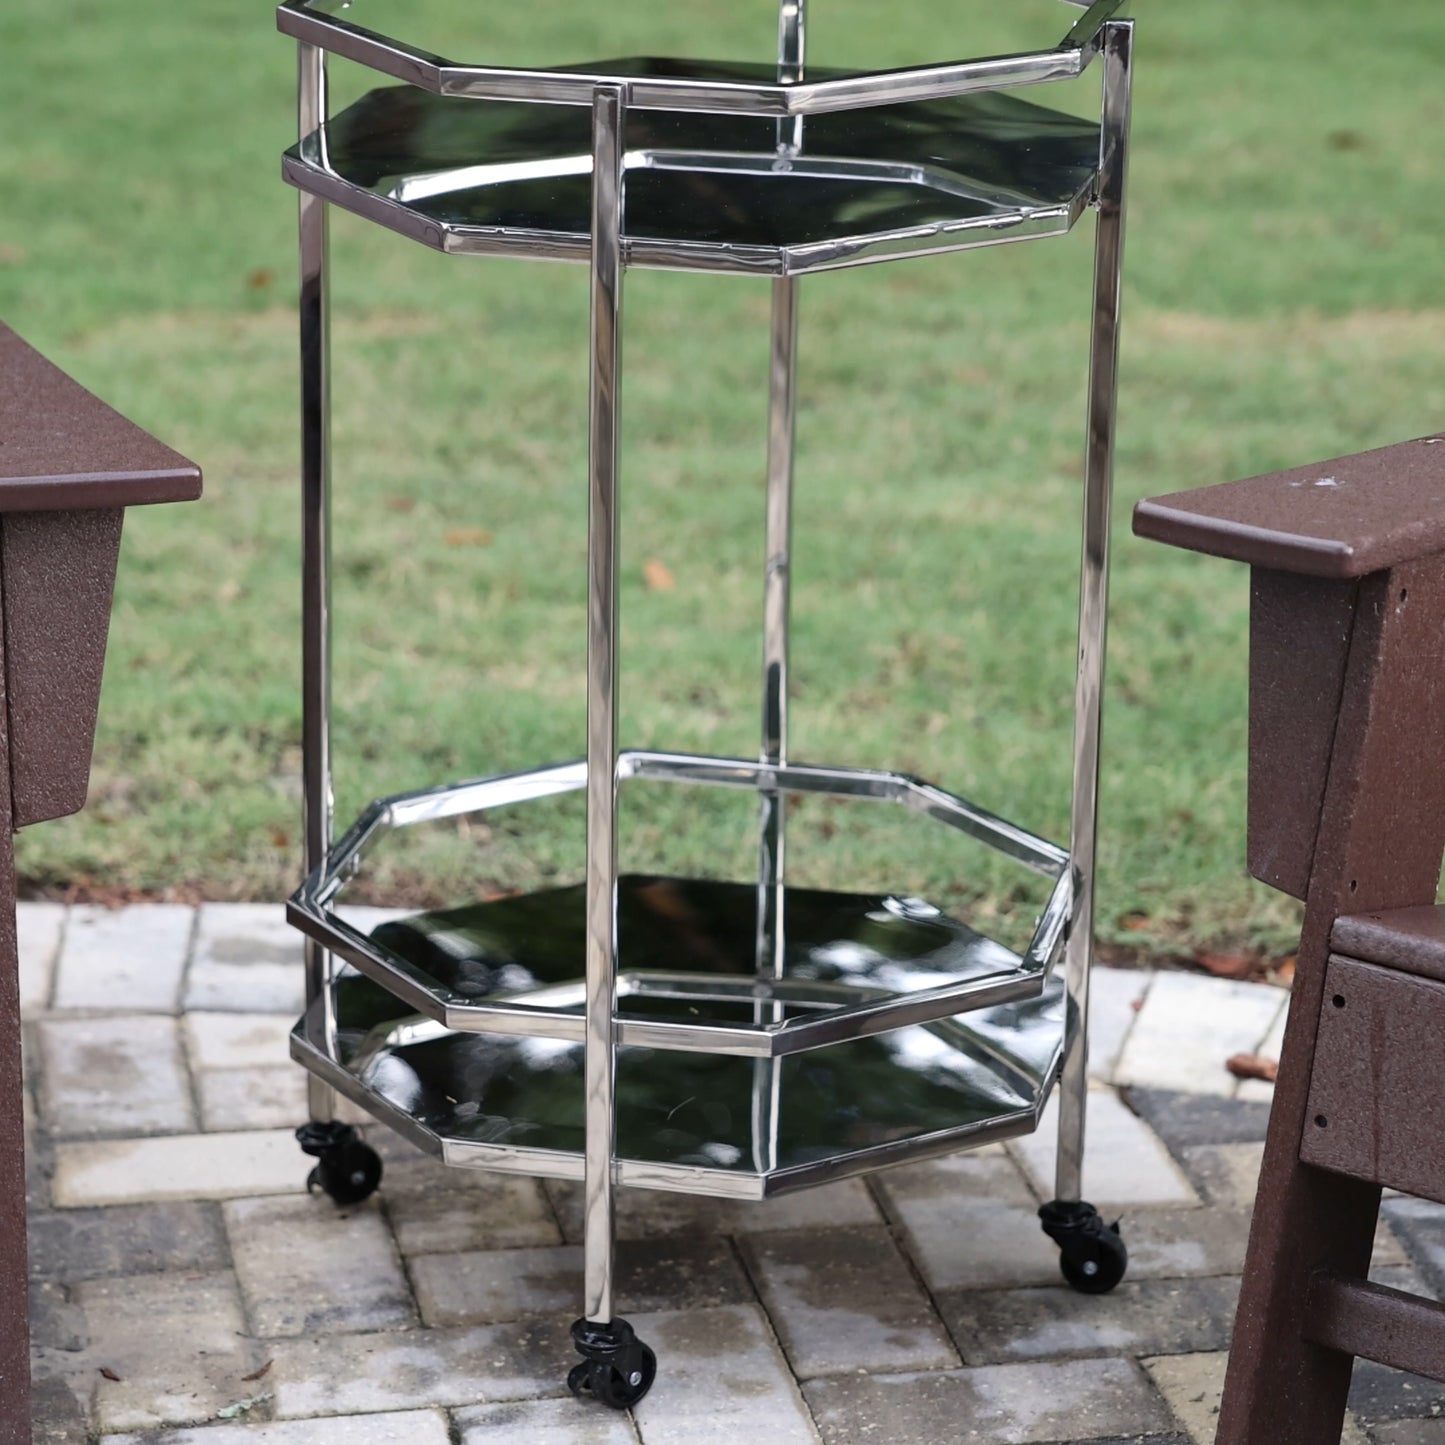 Bar cart with shelves to hold bar tools, wine, ice bucket, or wine bucket.  Includes wheels for easy rolling.  Use in the kitchen, bar, dining room, or on the patio.  Made of shiny stainless steel metal.